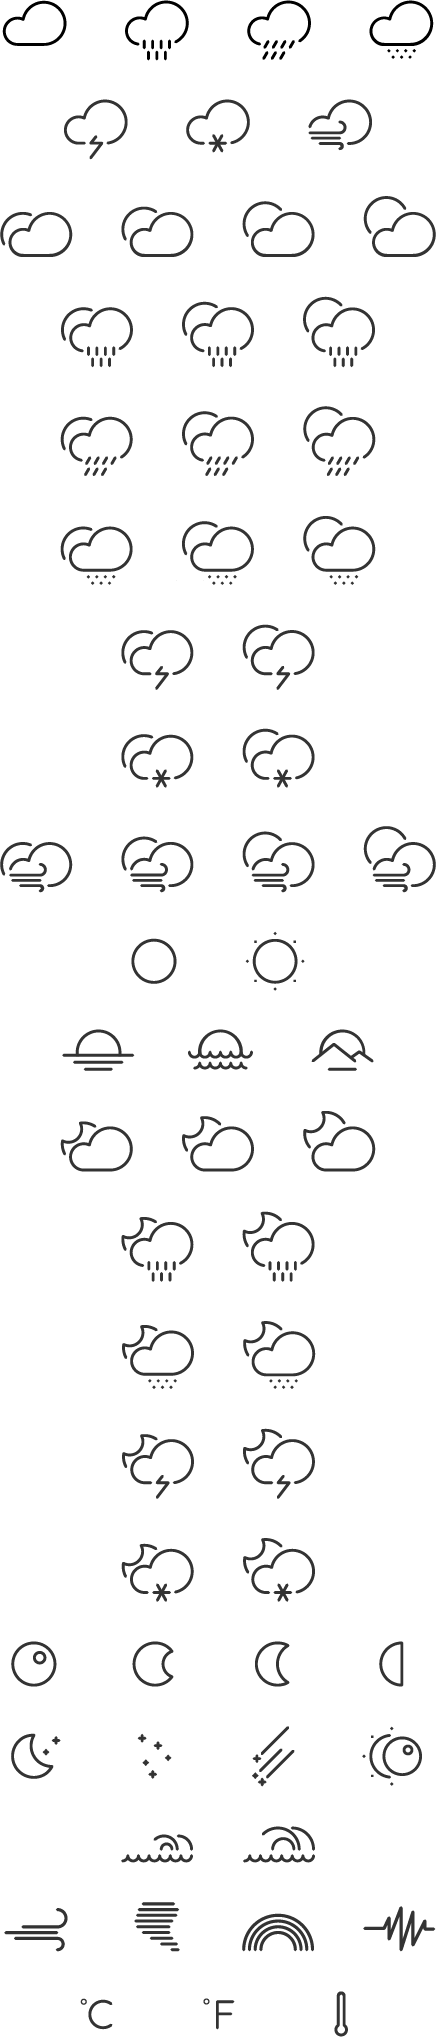 weather vector material icons icon cute 